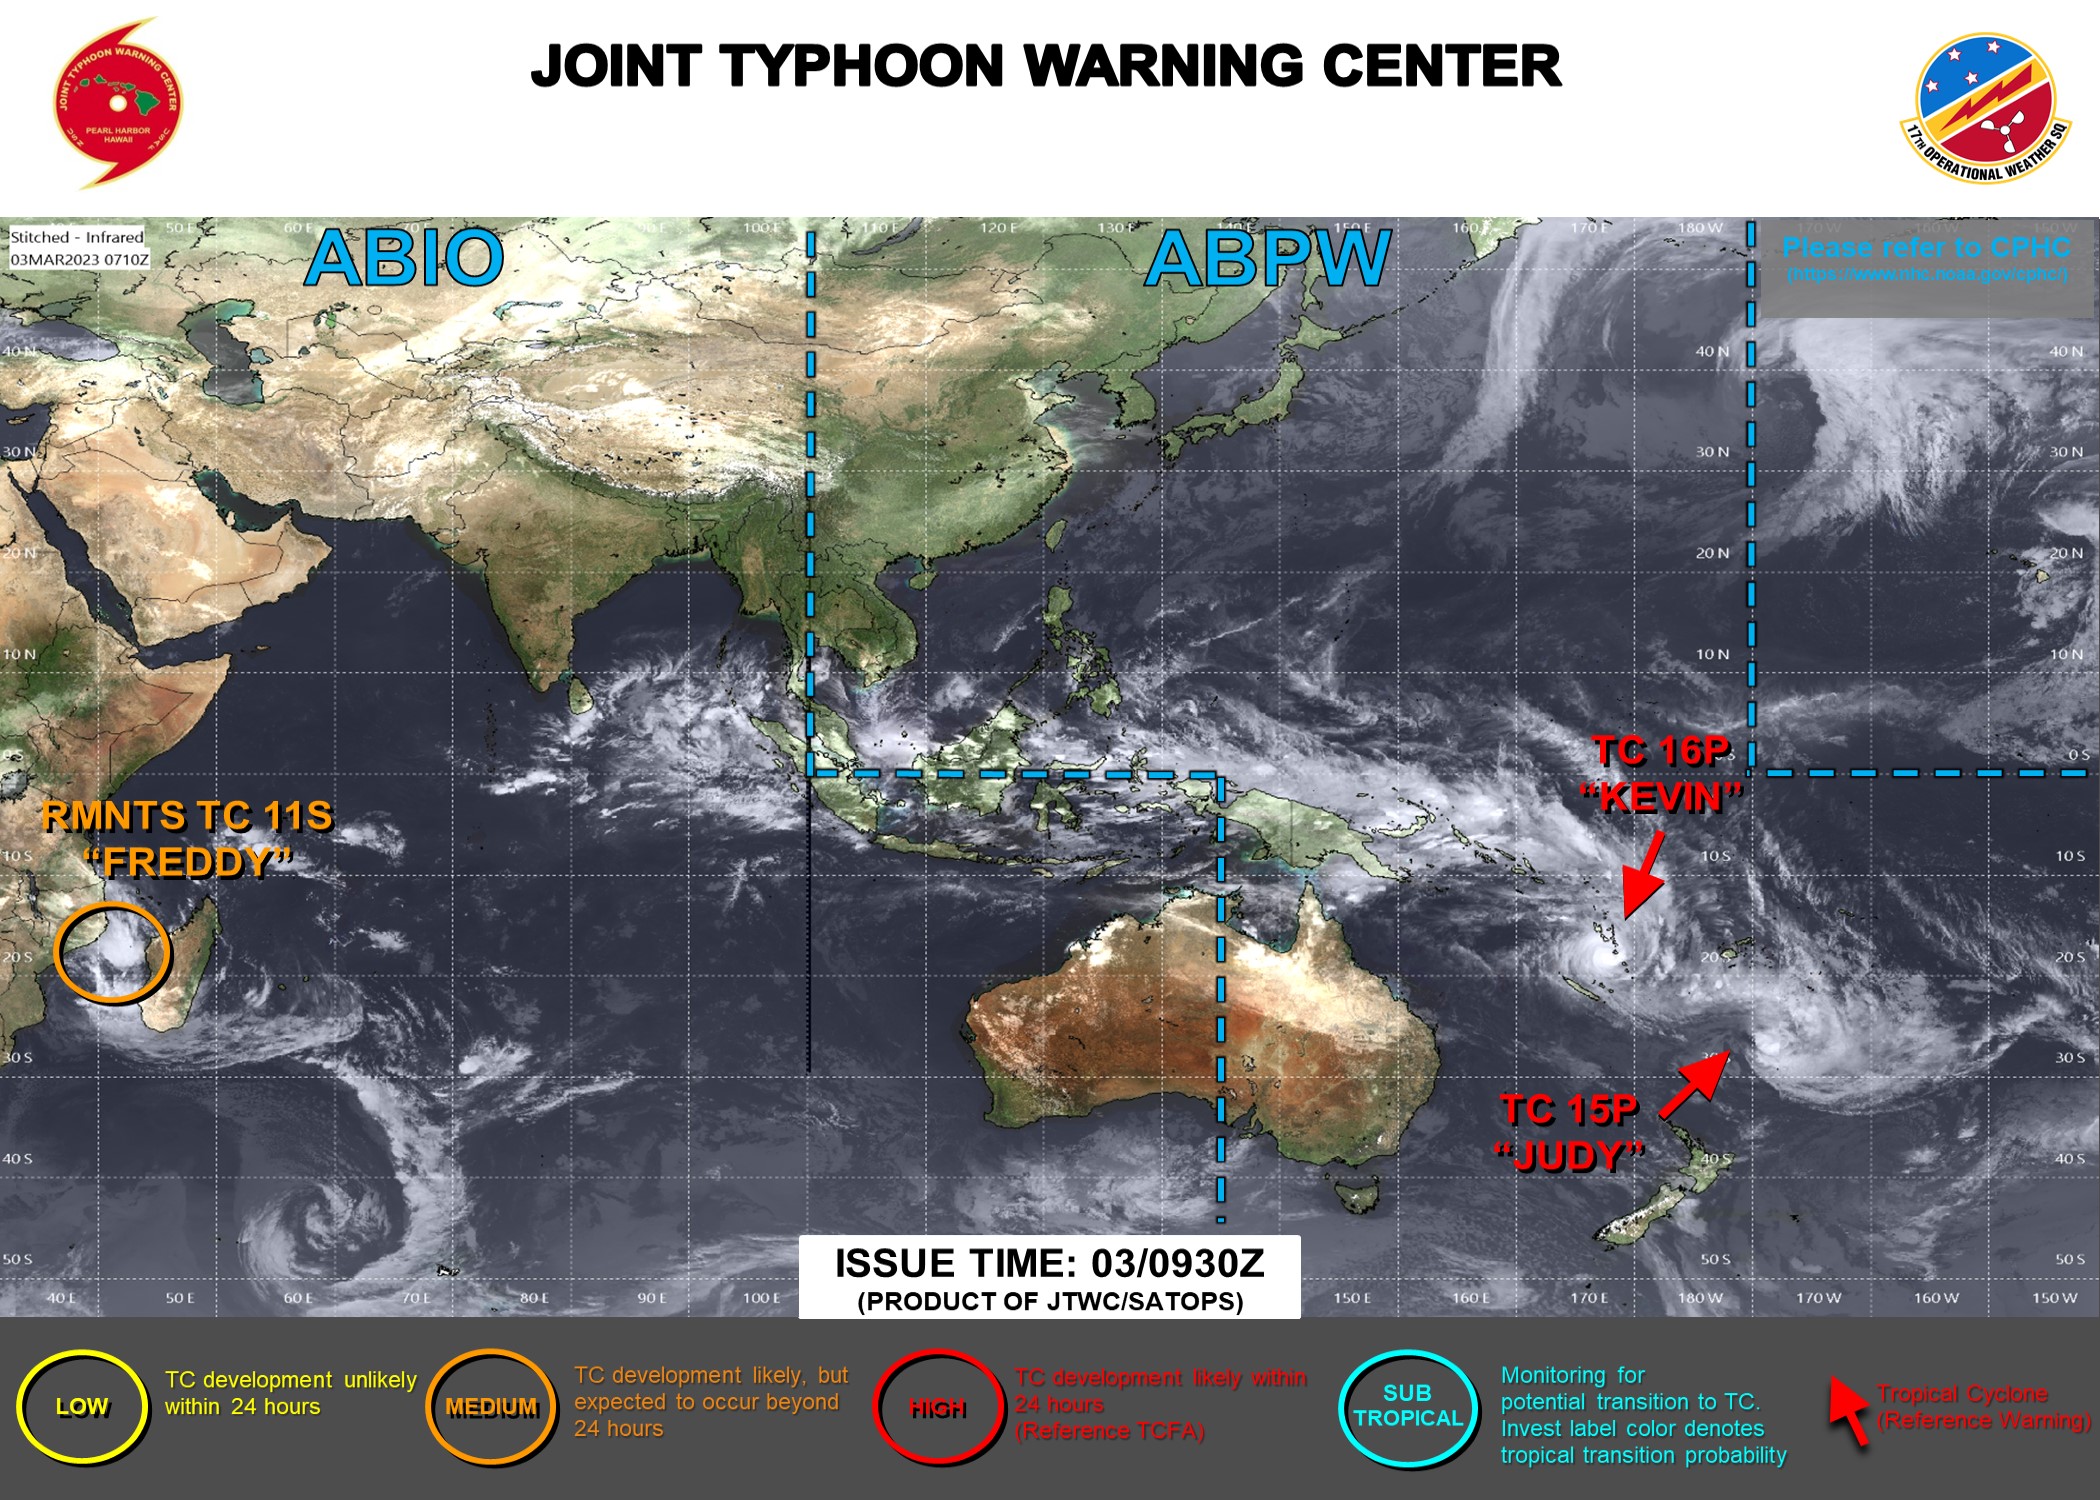 JTWC IS ISSUING 6 HOURLY WARNINGS AND 3HOURLY SATELLITE BULLETINS ON TC 16P(KEVIN). 3HOURLY SATELLITE BULLETINS ARE ISSUED ON STC 15P(JUDY) AND THE REMNANTS OF TC 11S(FREDDY).